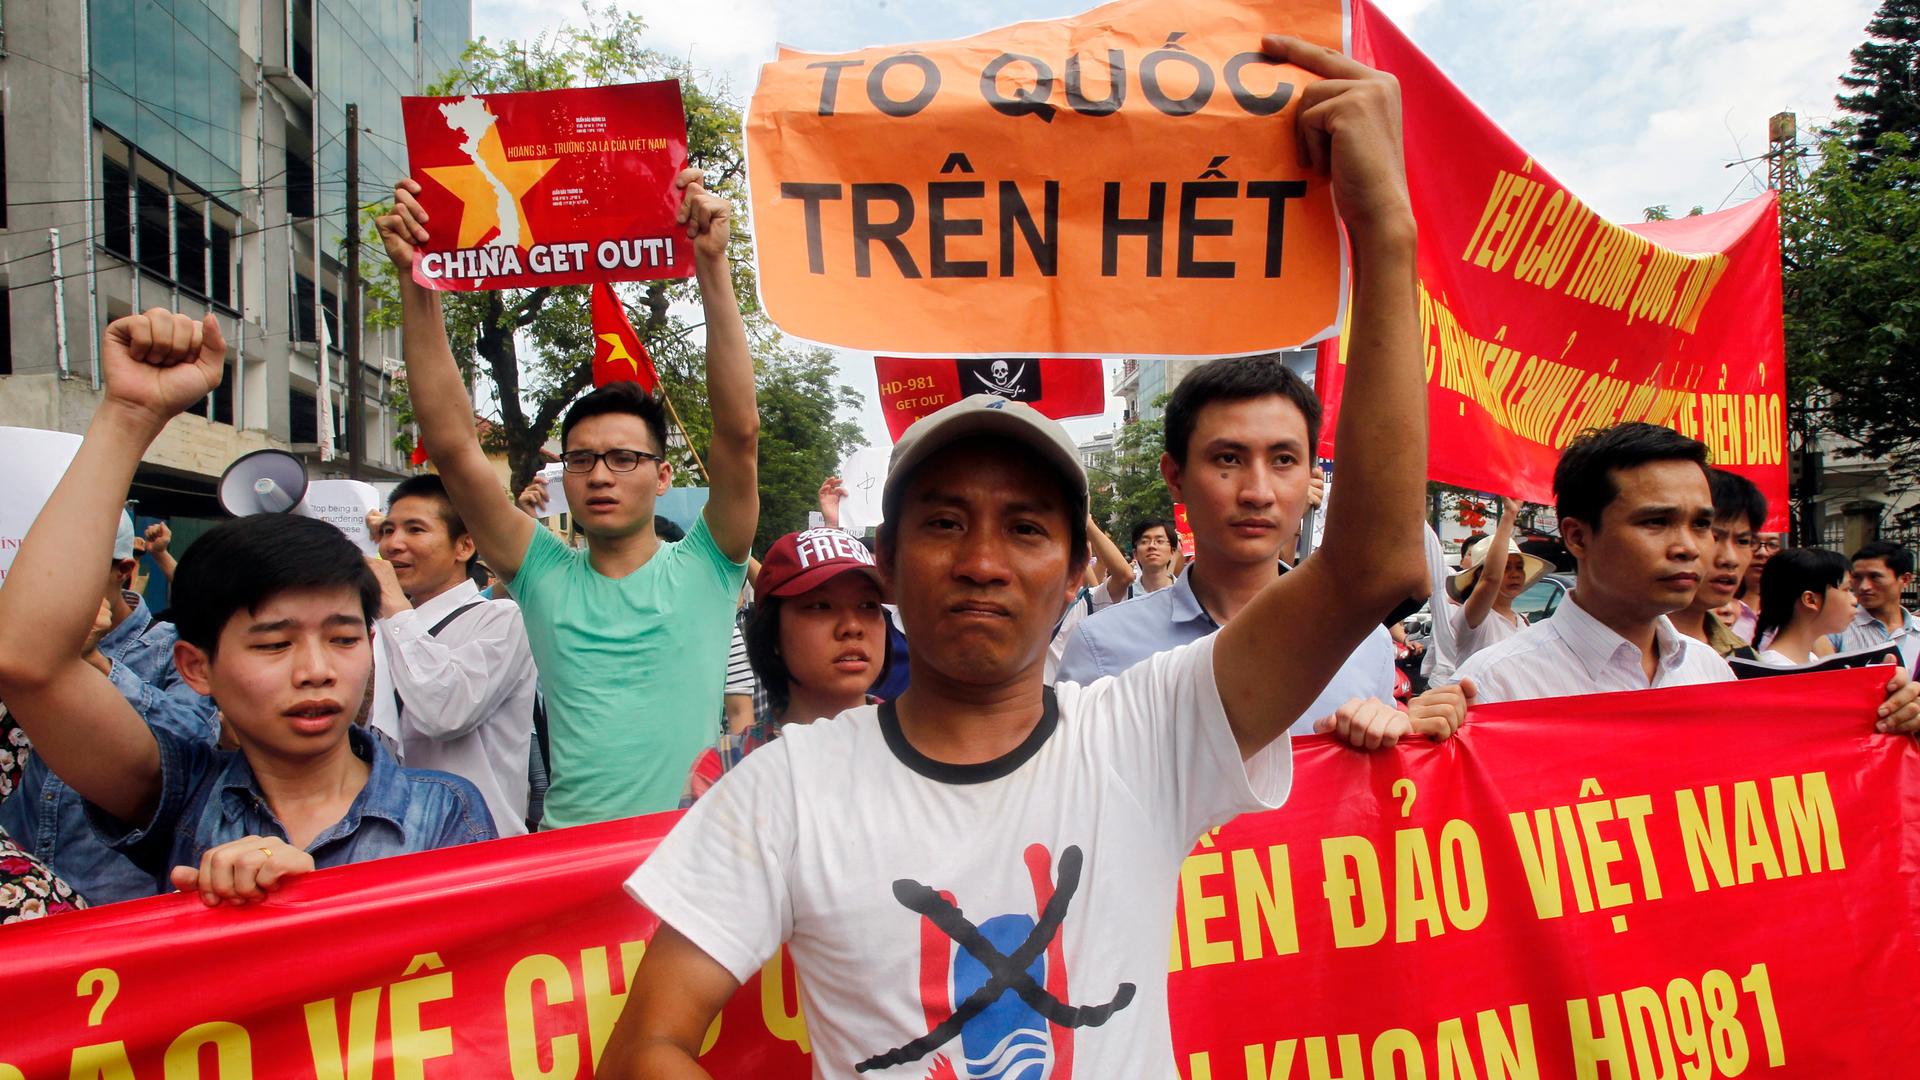 A protester holds a placard reading "nation first" during an anti-China protest in Hanoi to denounce China's setting up of a giant oil rig in the South China Sea.